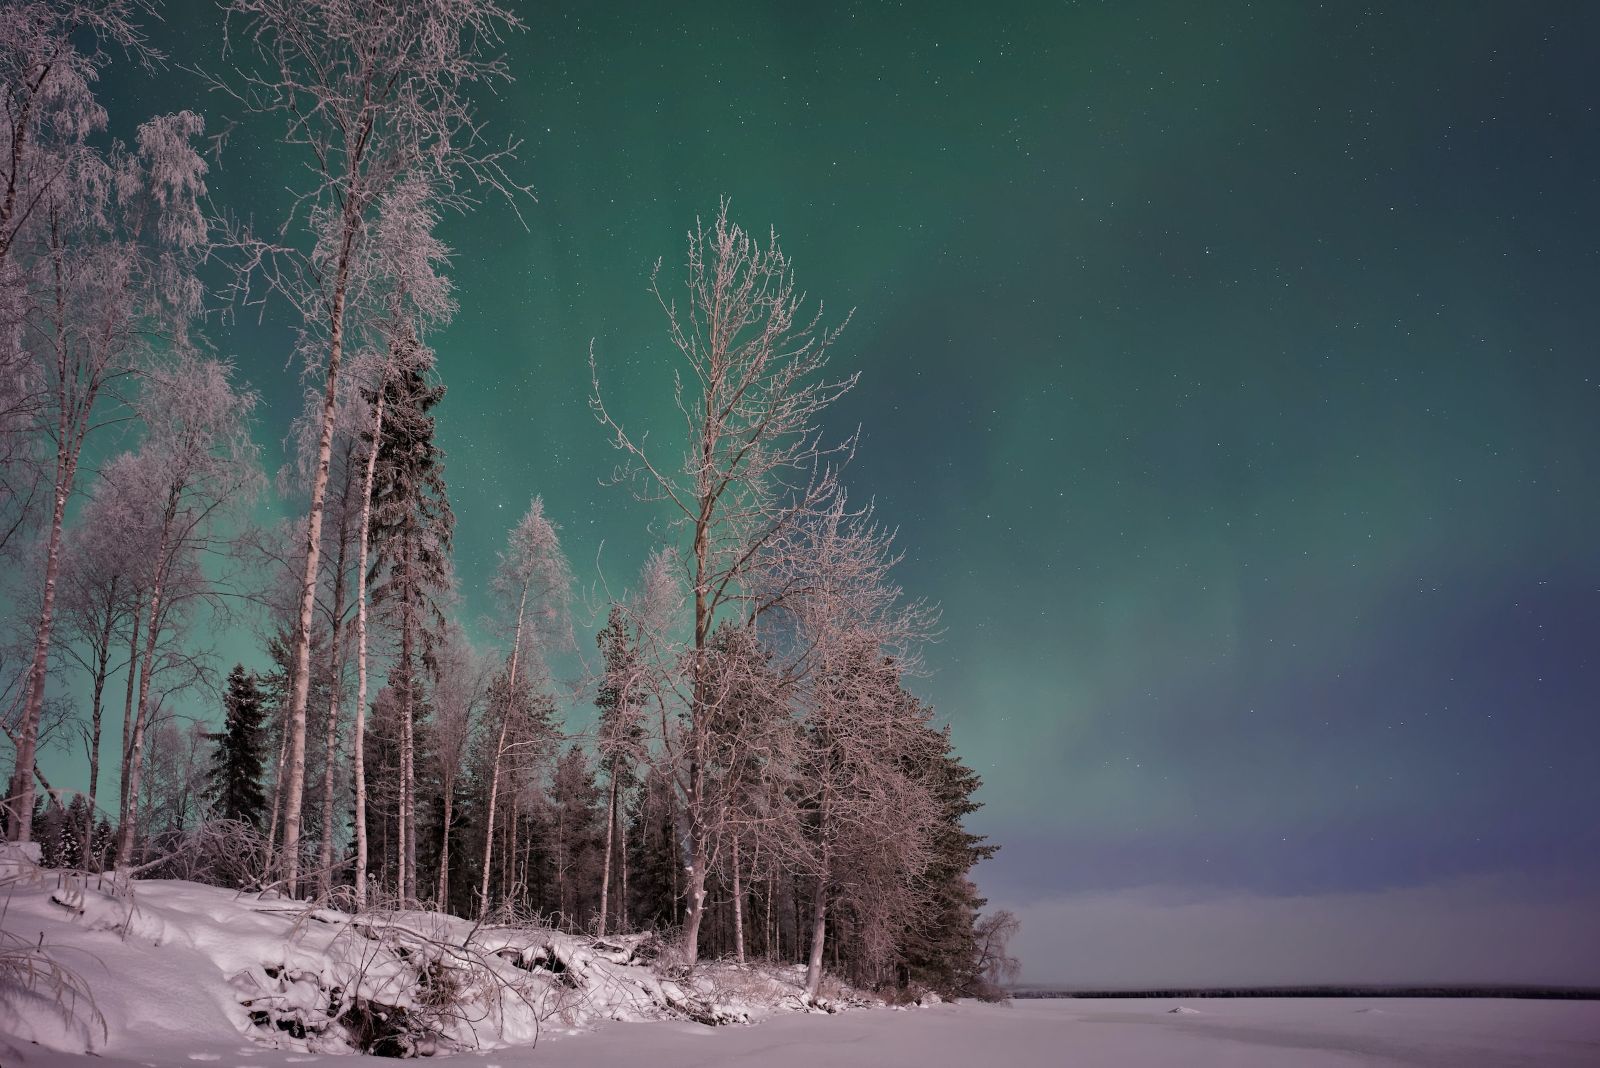 Northern lights over the Finnish Lapland